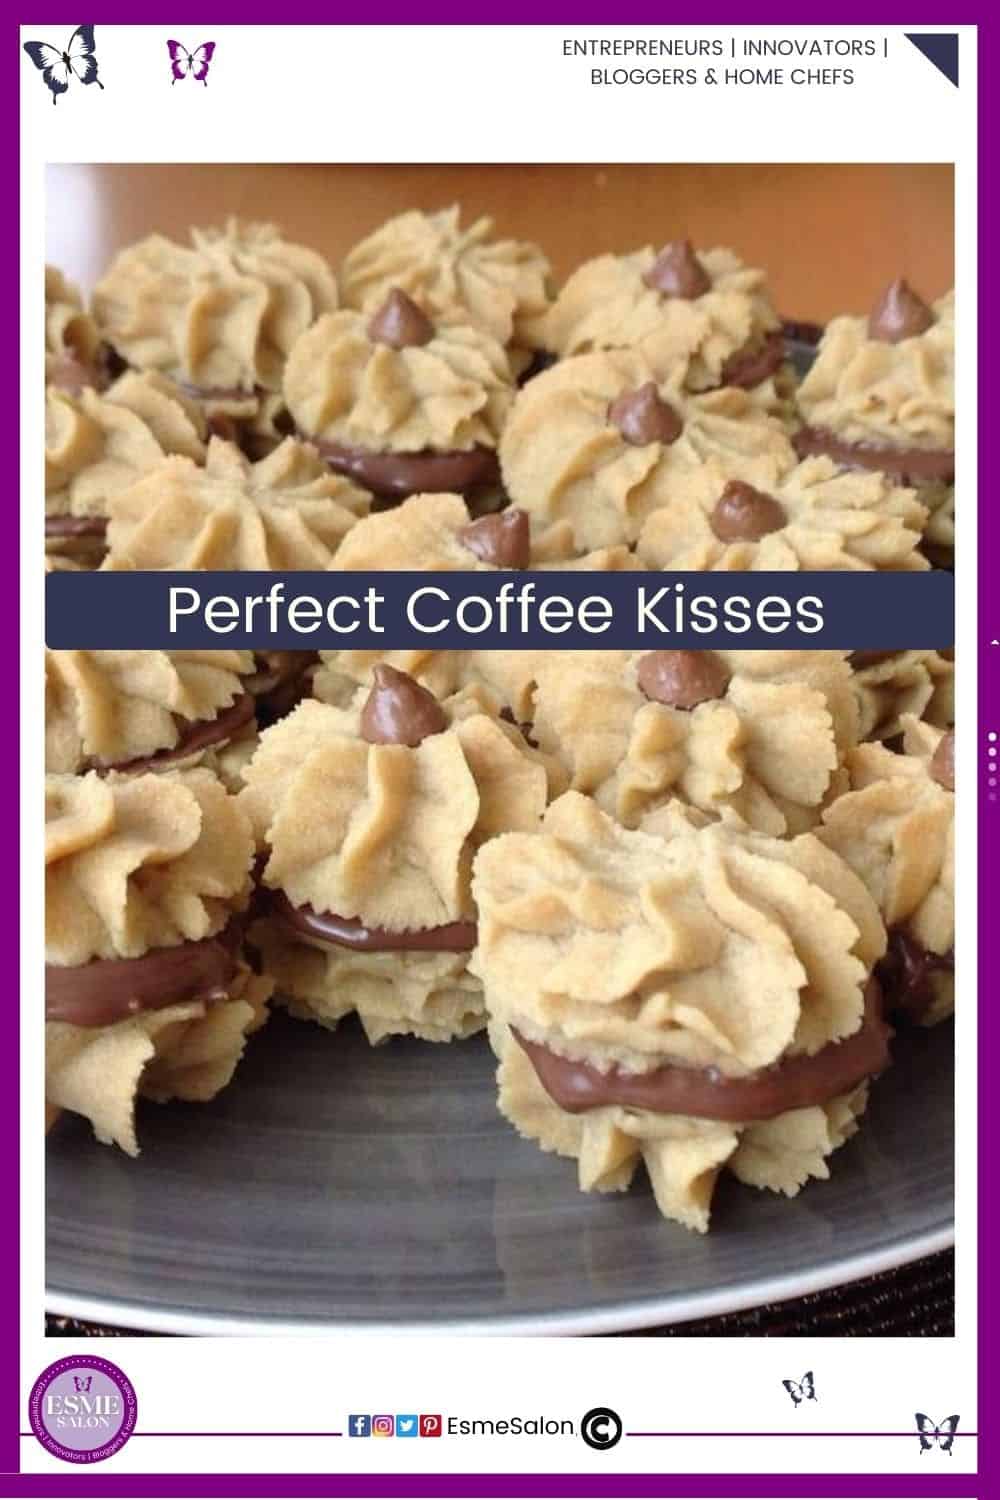 an image of a batch of Coffee Kisses cookies with chocolate filling and stacked together